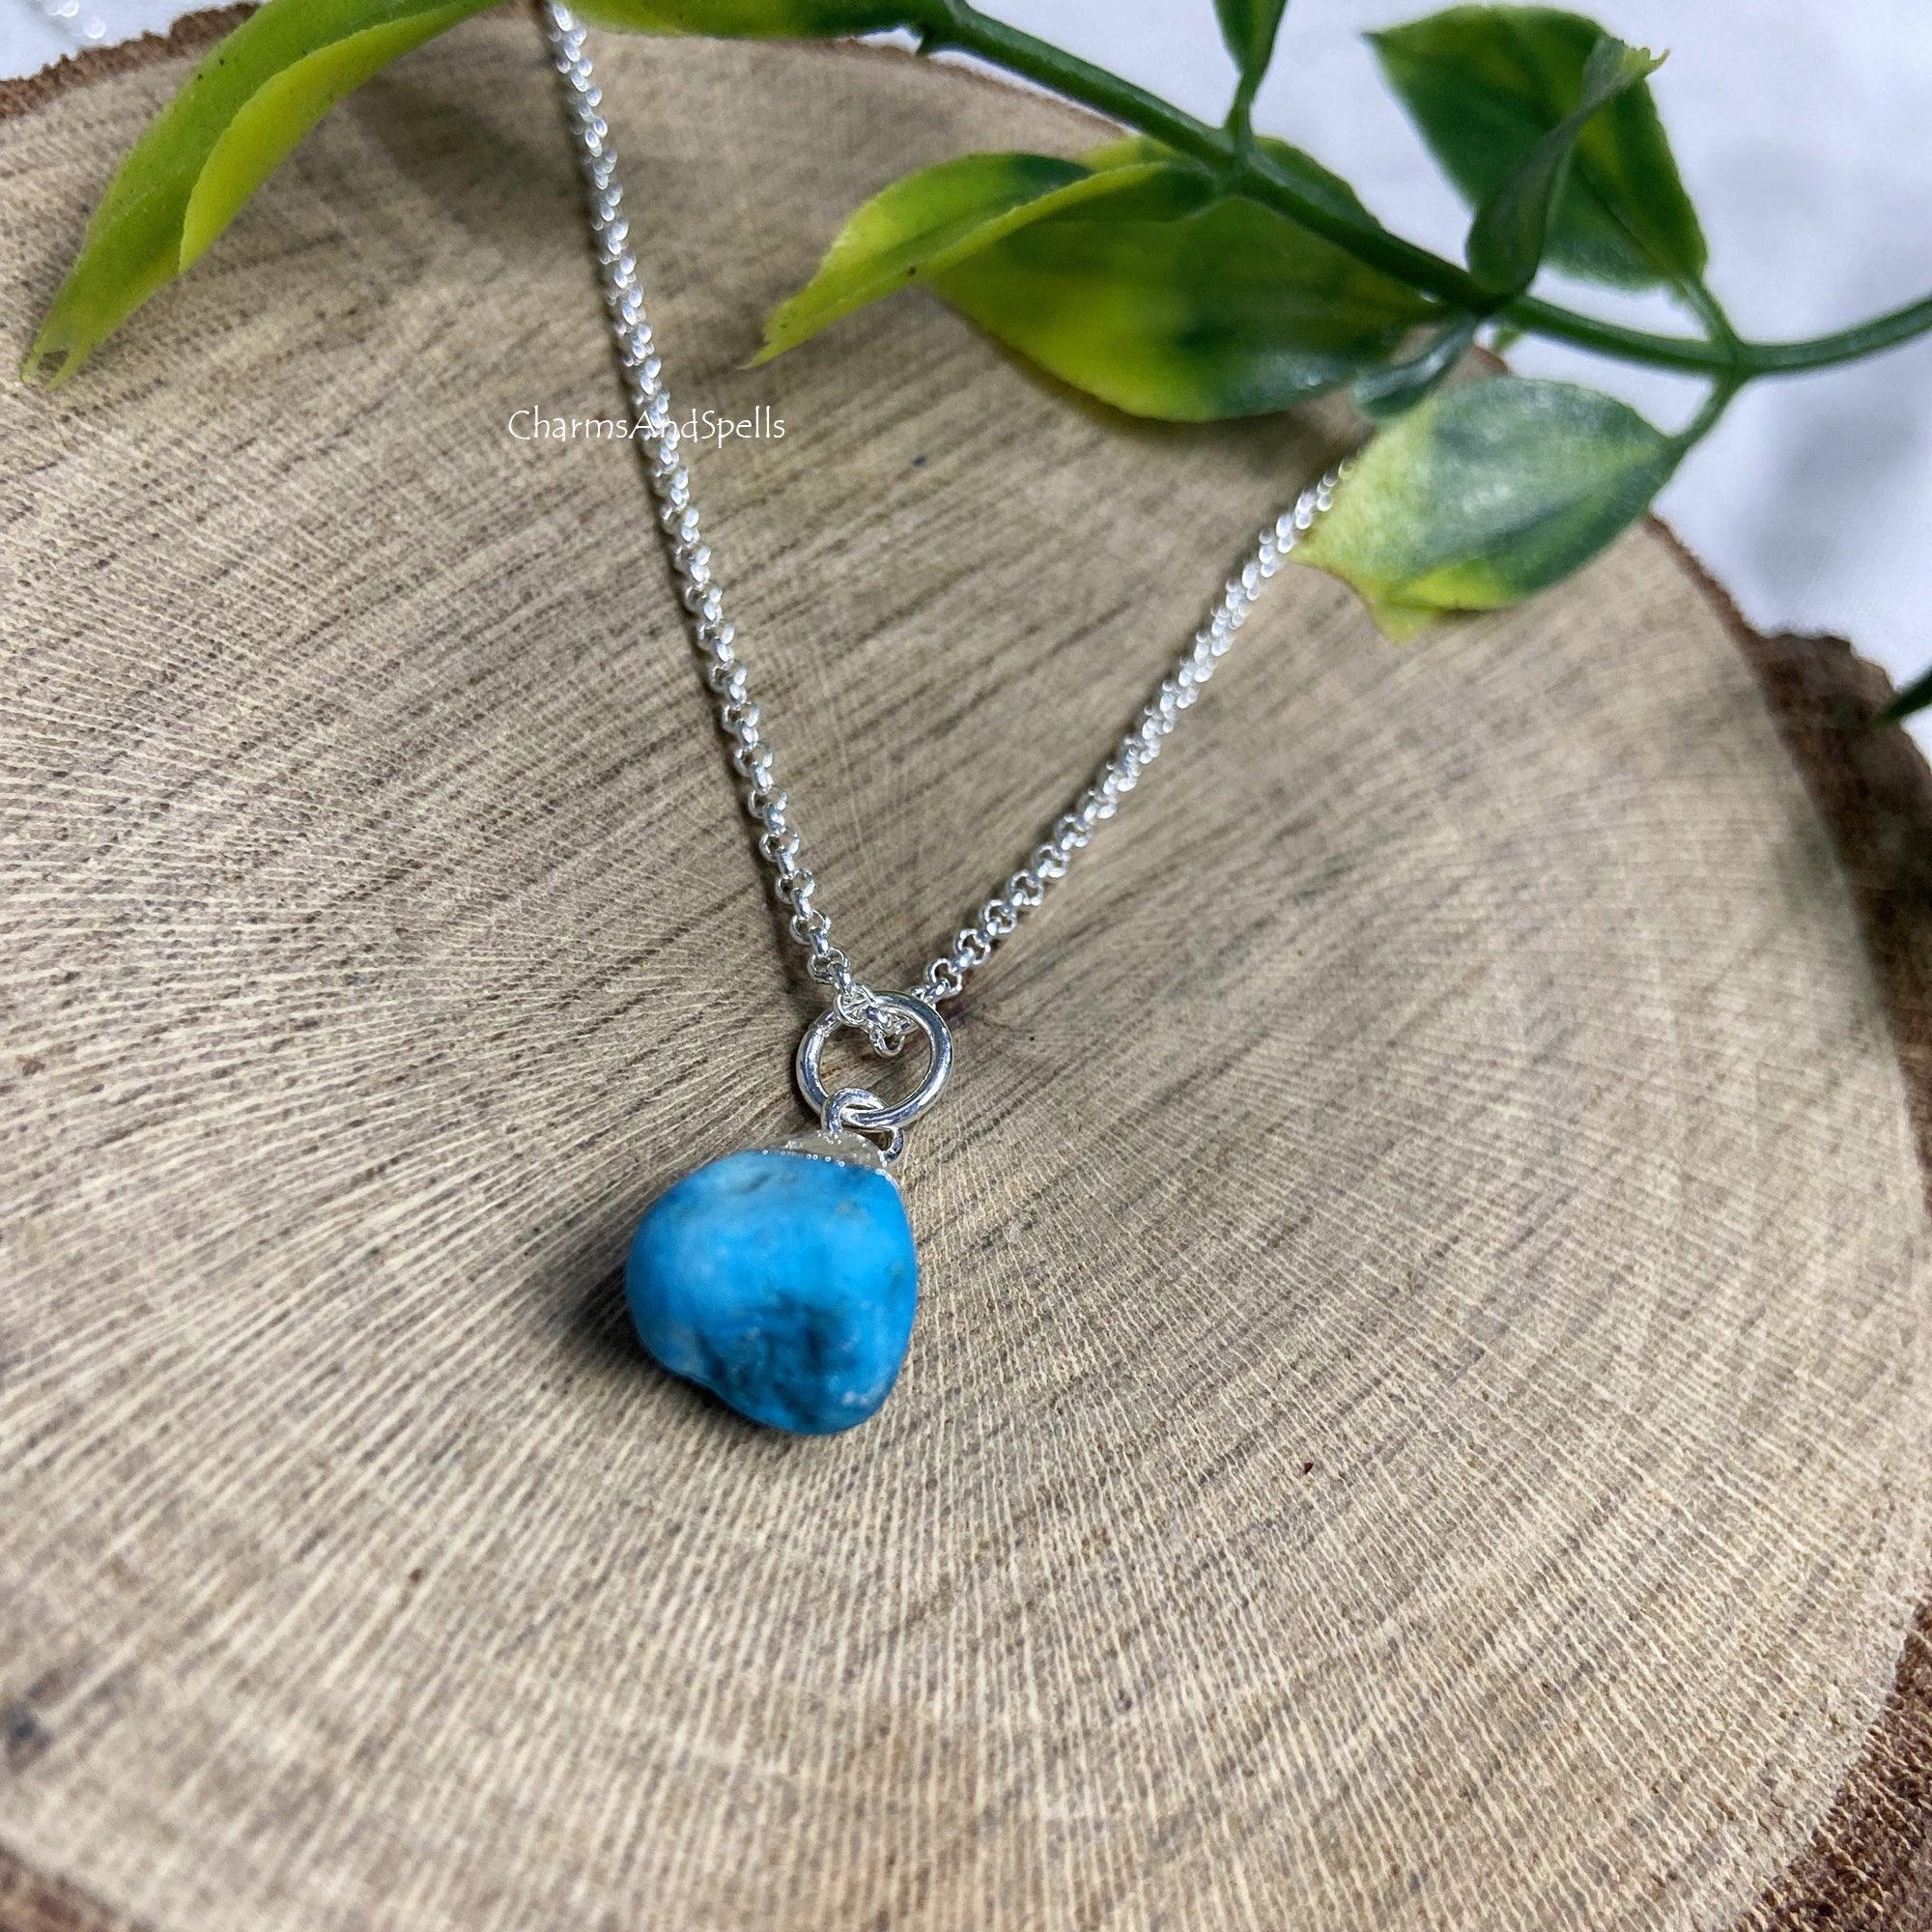 Turquoise Necklace, December Birthstone Necklace, Rough Gemstone Necklace, Raw Healing Crystal Jewelry, Boho Necklace, Gift For Her, Gift